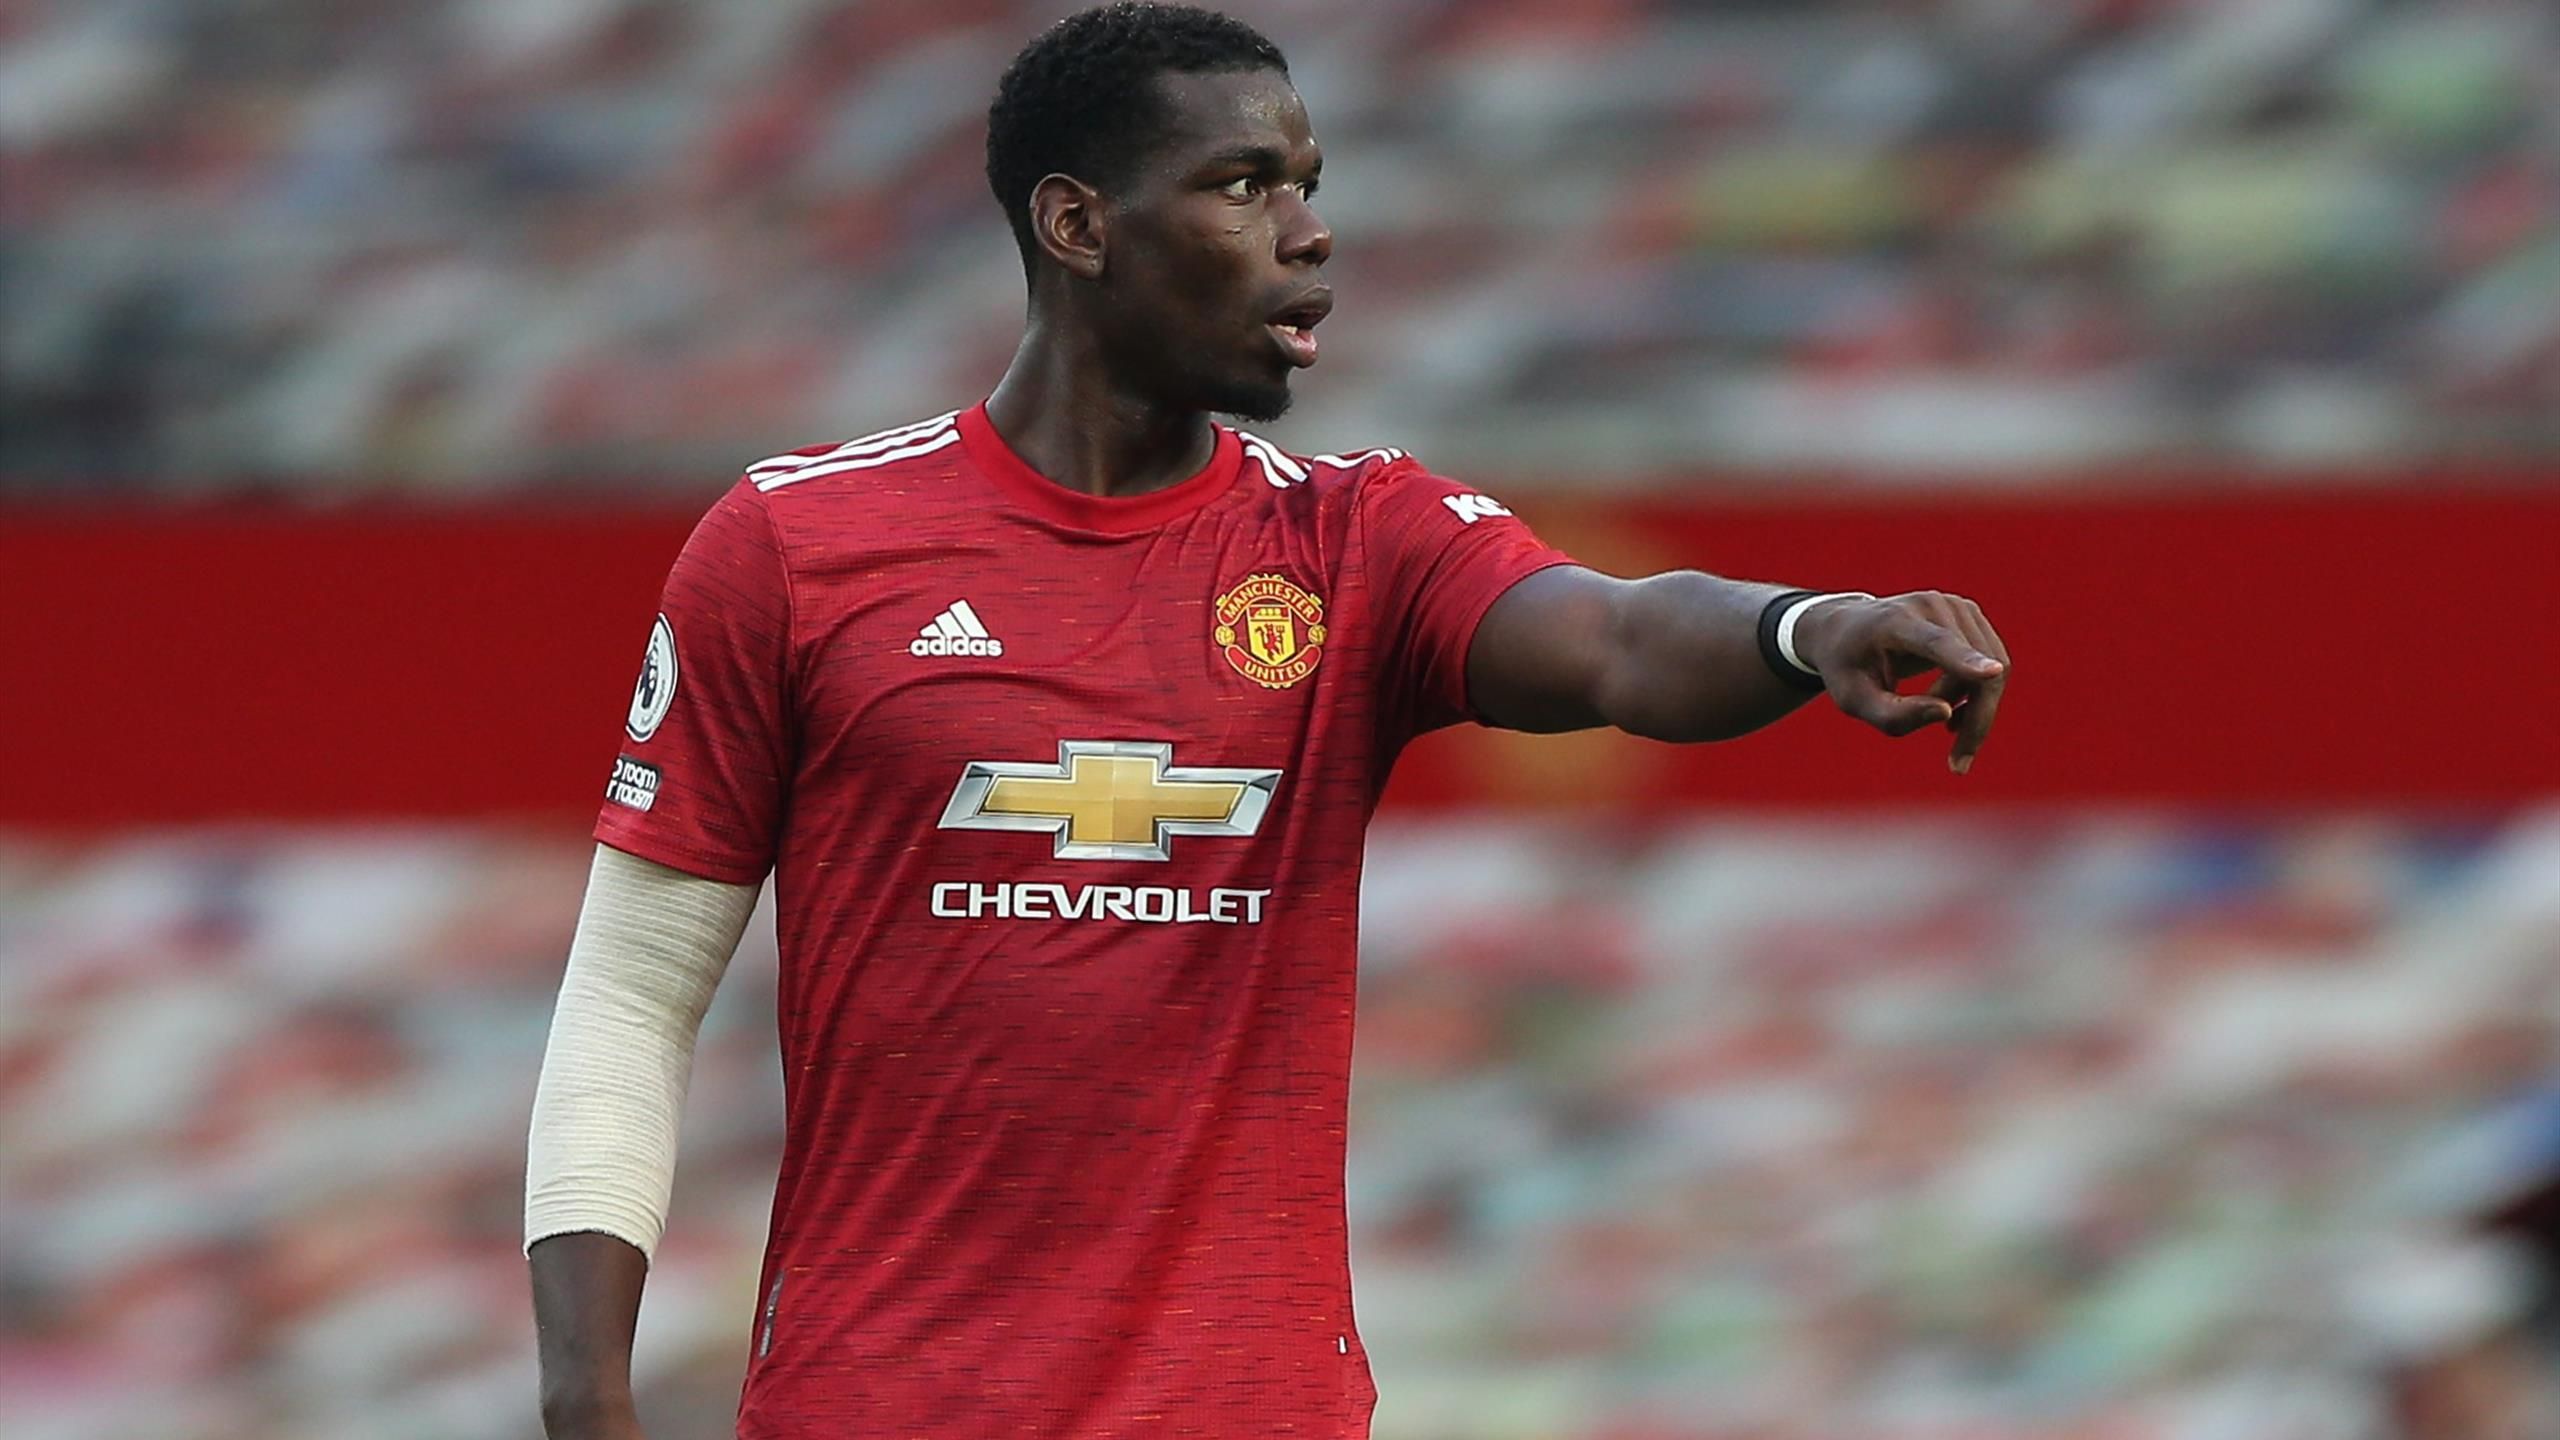 Paul Pogba only playing well for certain managers is embarrassing, says Jamie Carragher